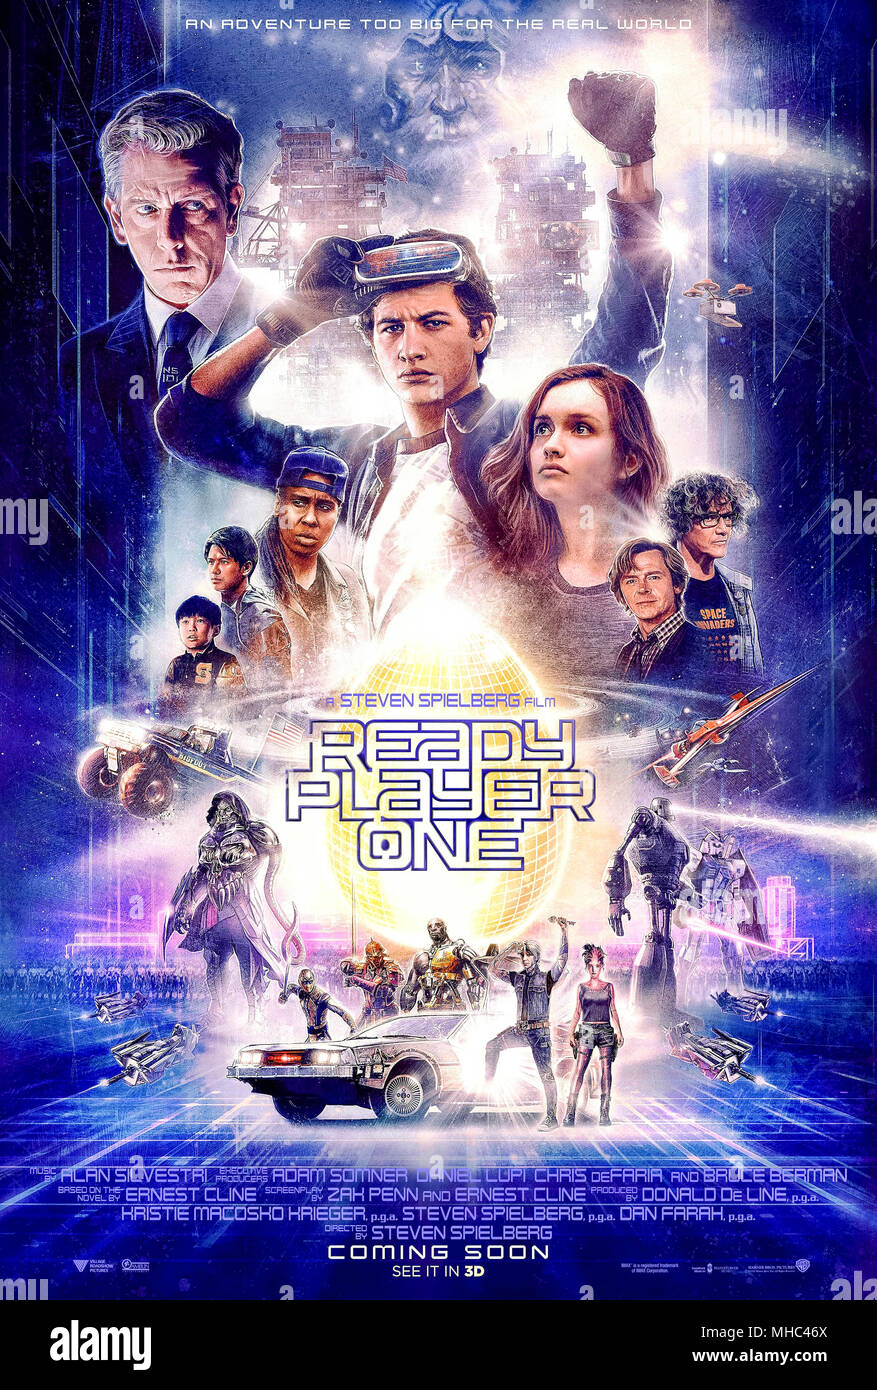 Ready Player One (2018) directed by Steven Spielberg and starring Tye Sheridan, Olivia Cooke and Ben Mendelsohn. In 2045 humans visit the OASIS, a virtual reality where anything is possible. Stock Photo